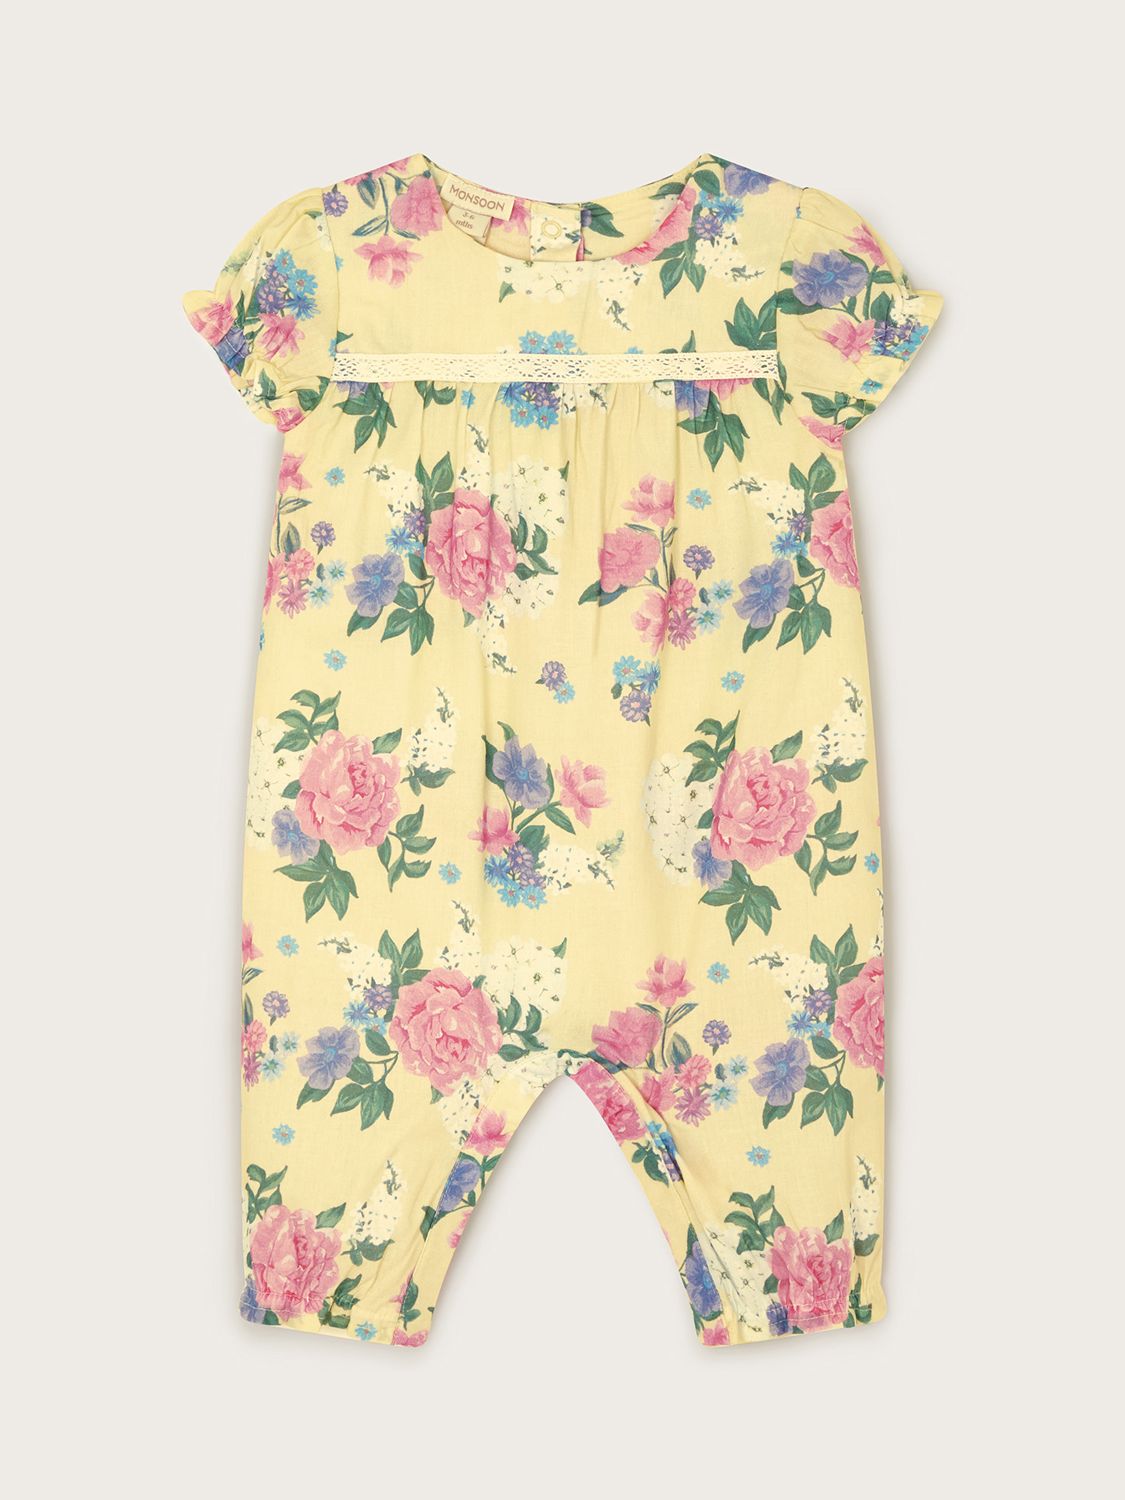 Monsoon Baby Floral Print Romper, Yellow/Multi, 0-3 months